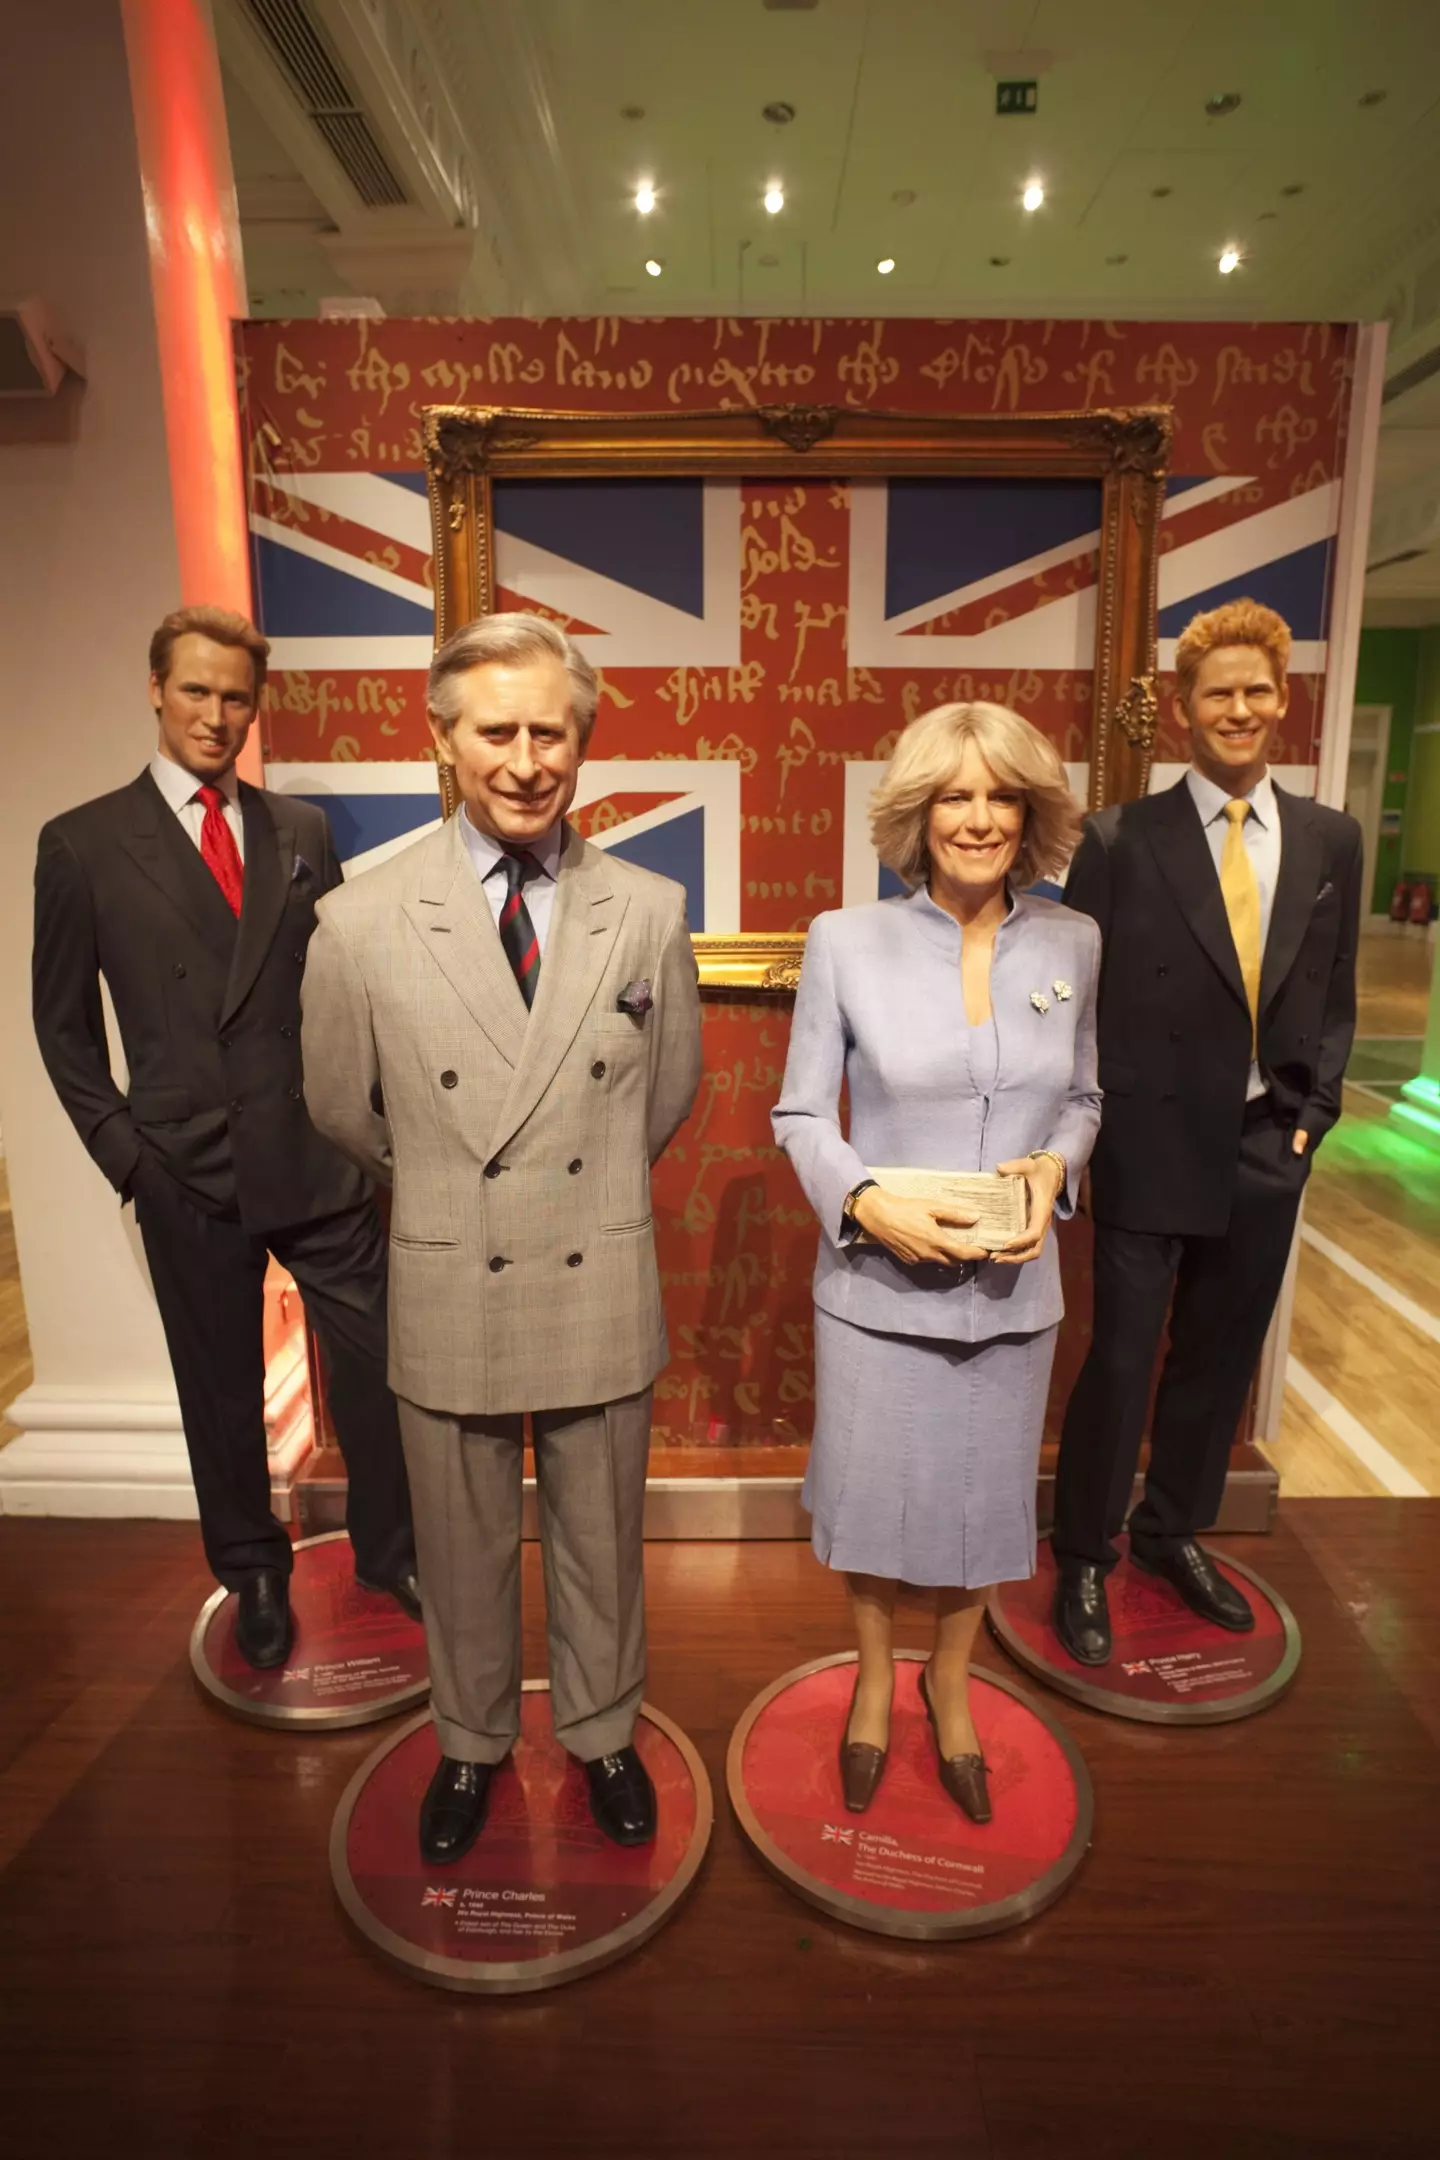 Madame Tussauds is one of the most popular tourist attractions in London.